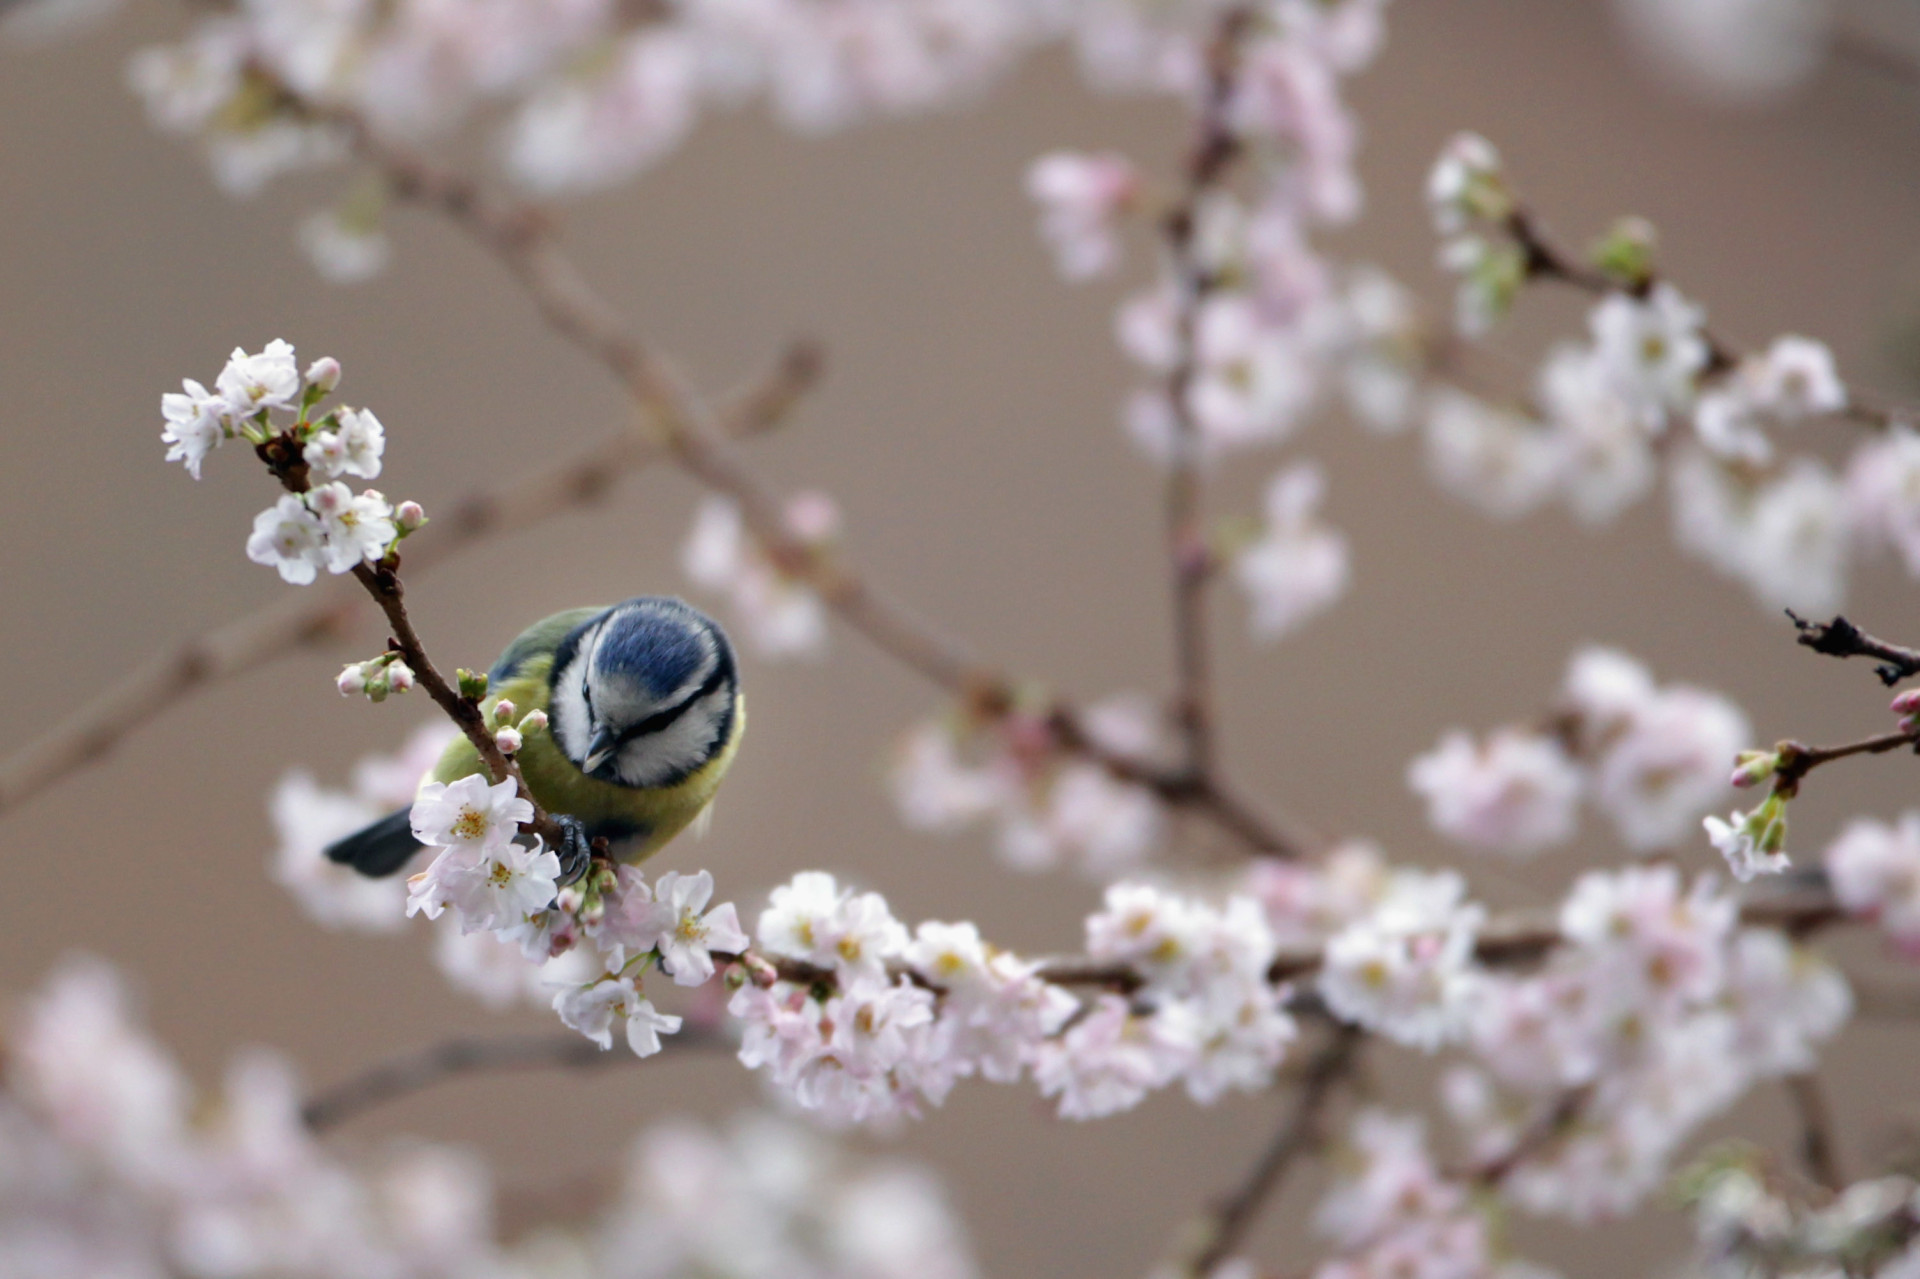 A blue tit collects early blossom petals to line its nests from a tree in Mayfair, London.<p><a href="https://www.msn.com/en-us/community/channel/vid-7xx8mnucu55yw63we9va2gwr7uihbxwc68fxqp25x6tg4ftibpra?cvid=94631541bc0f4f89bfd59158d696ad7e">Follow us and access great exclusive content every day</a></p>